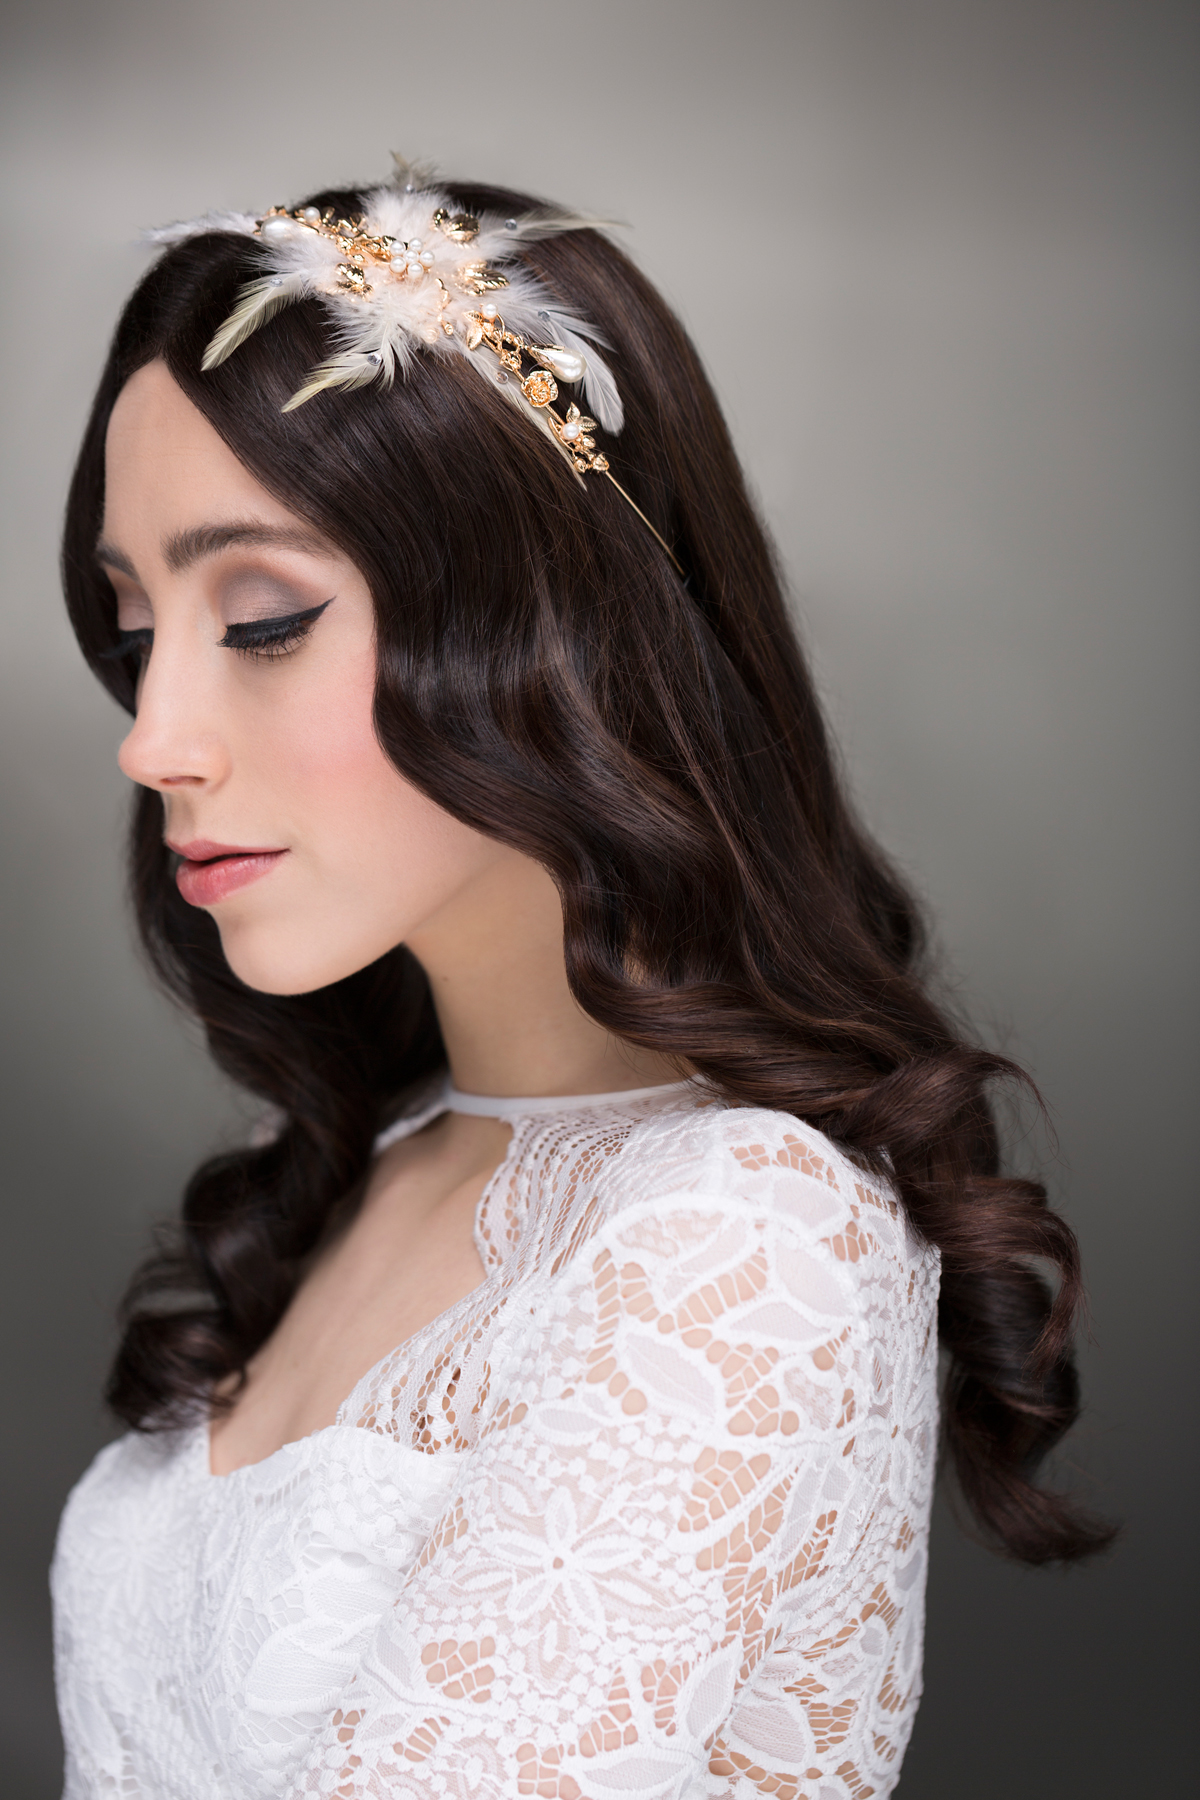 About Eve handcrafted wedding headpieces hair accessories 12